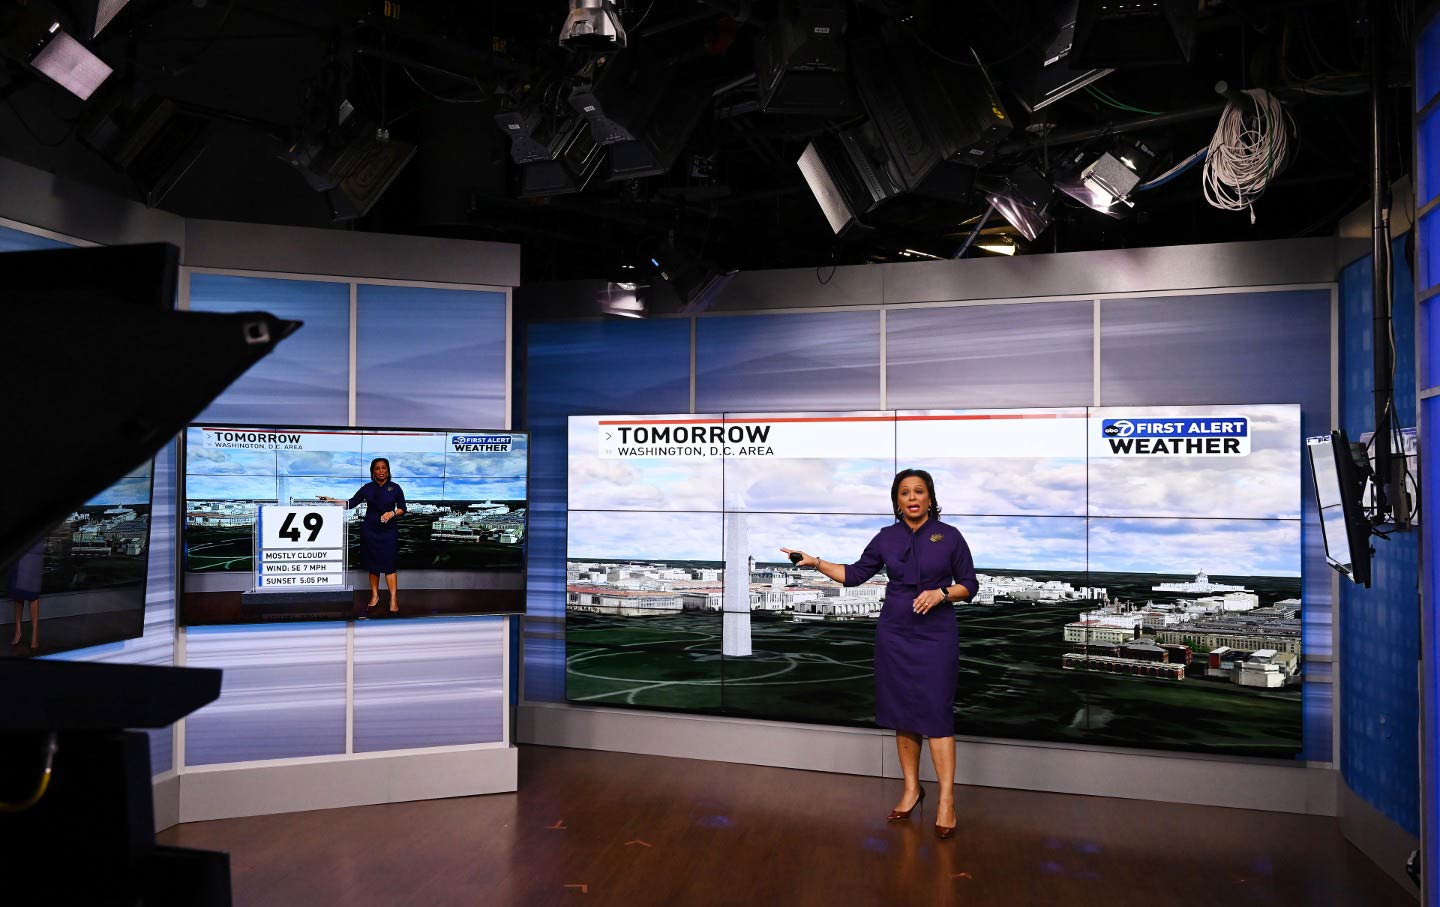 Veronica Johnson, chief meteorologist at WJLA, gives the weather forecast on air at the station on January 10, 2023, in Arlington, Va.